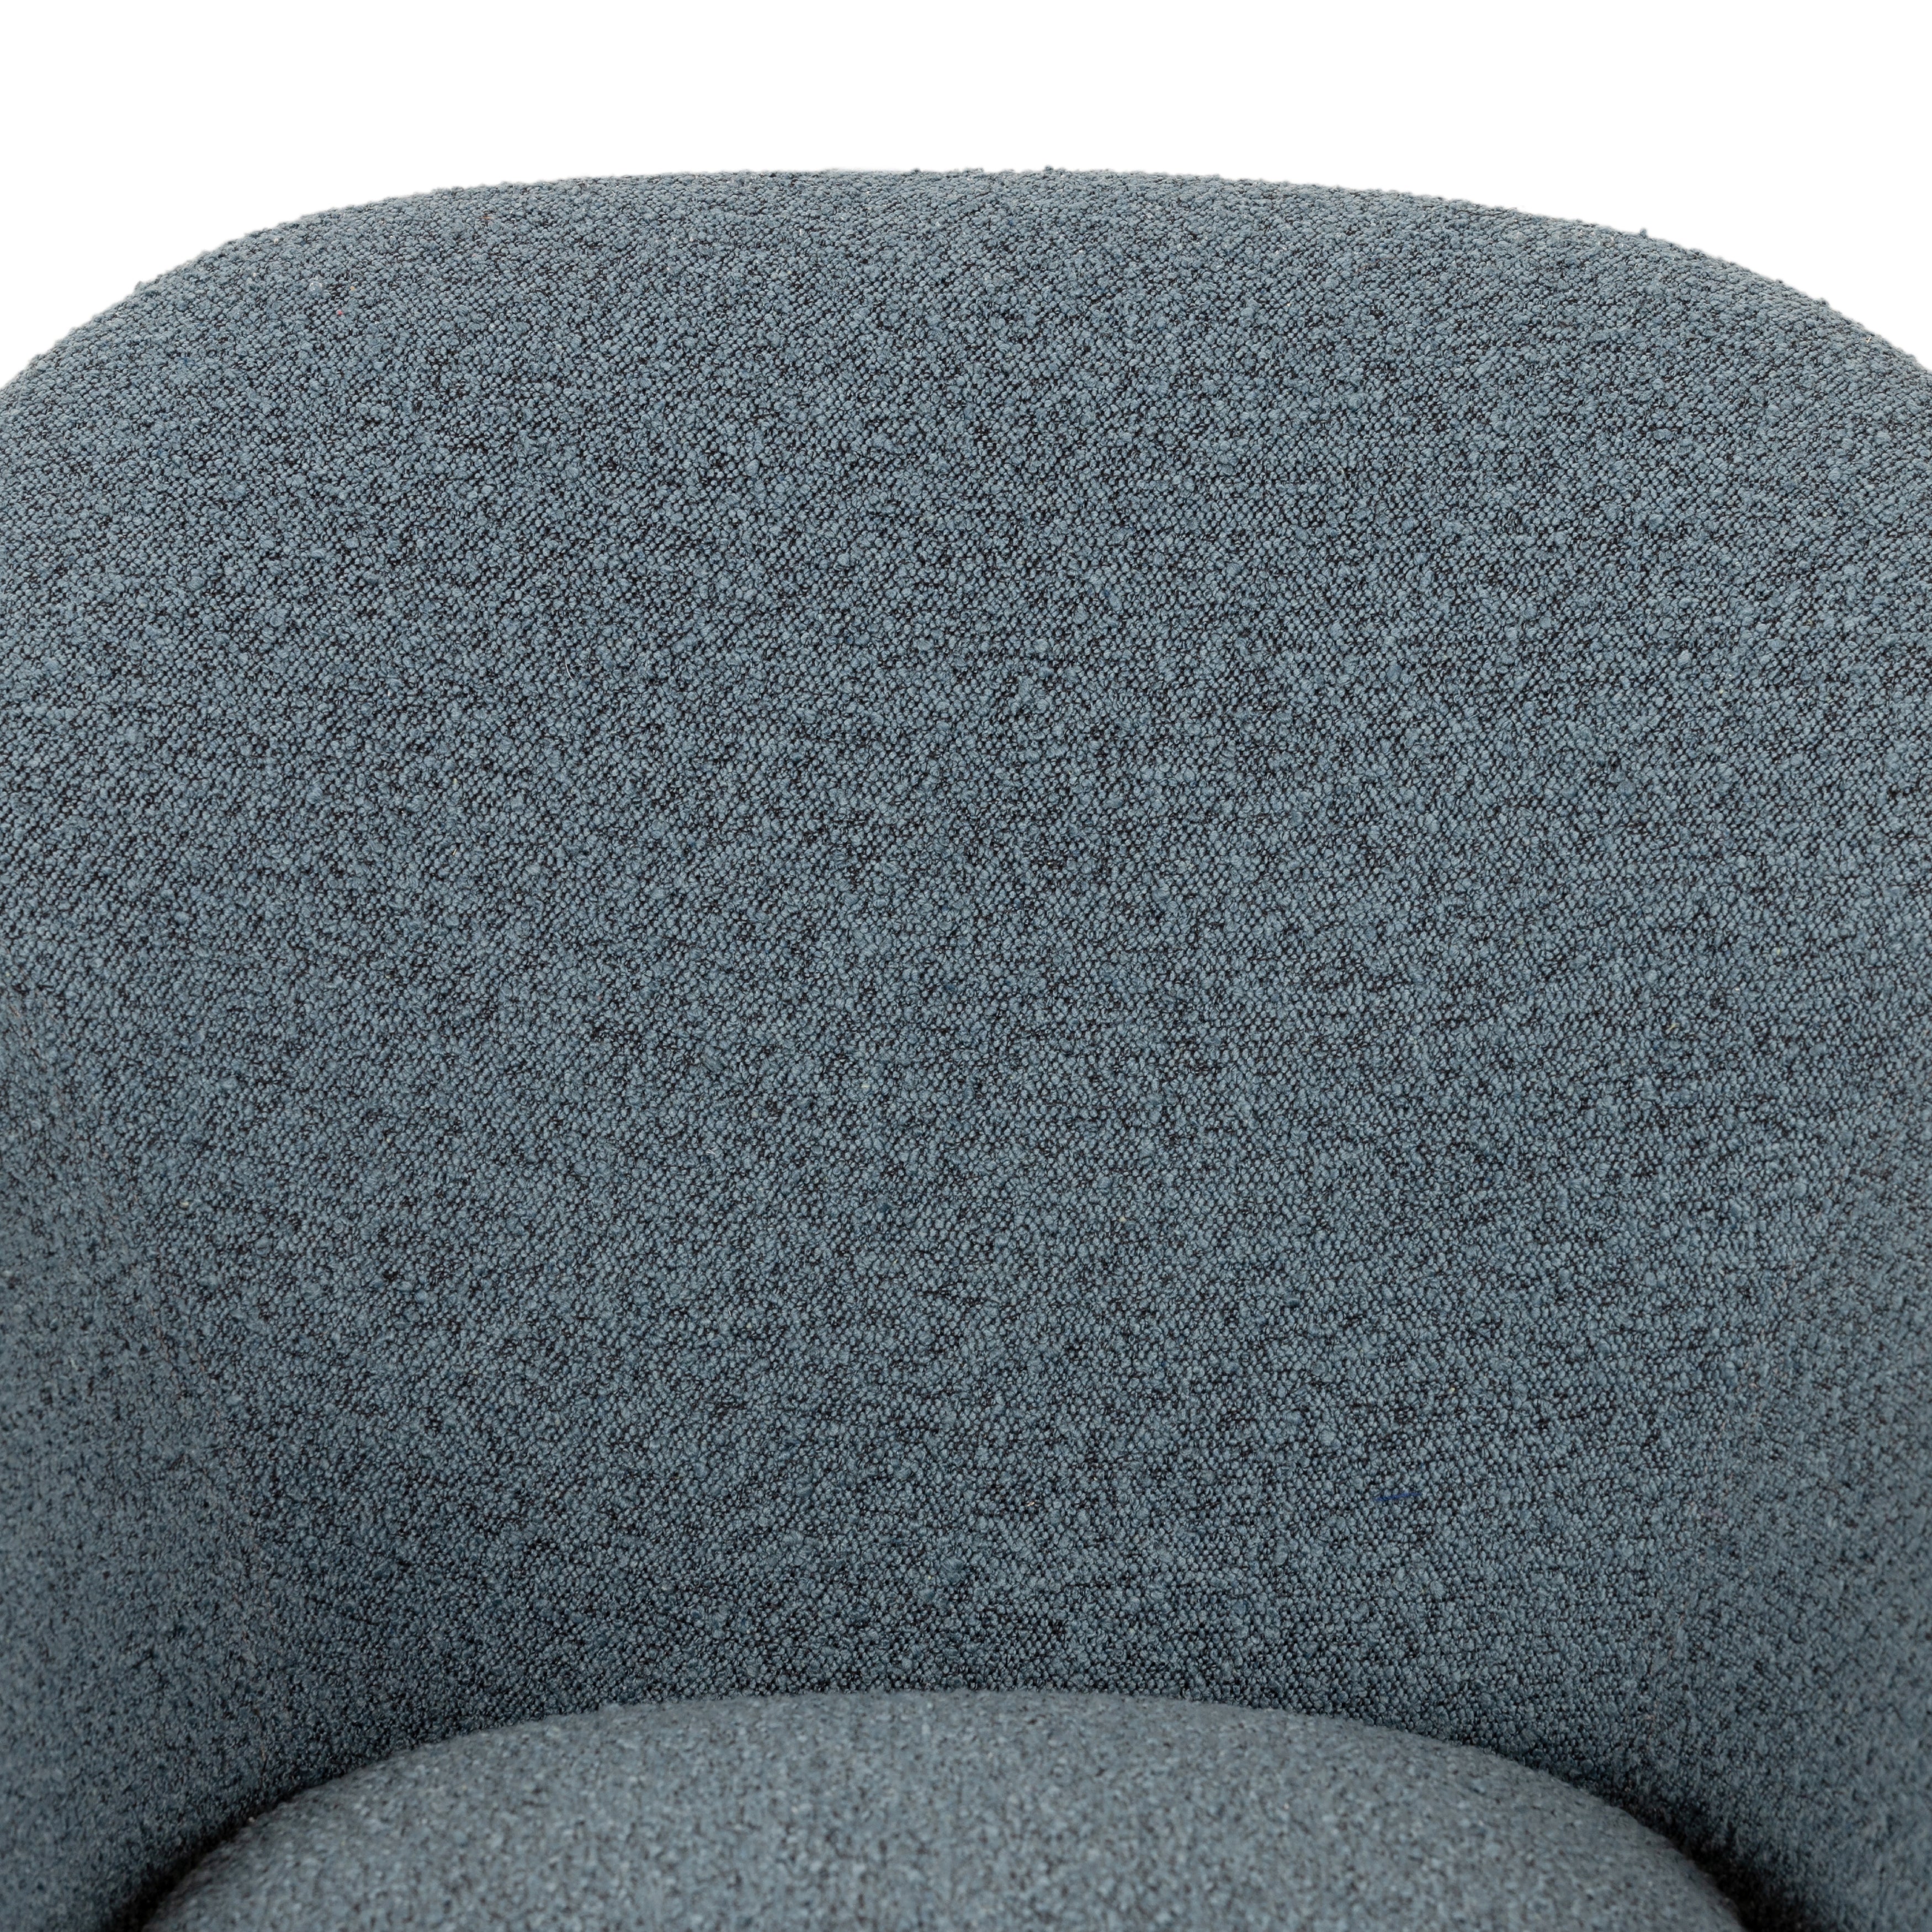 We love the curvy silhouette and classic rolled arms of this Suerte Chair - Knoll Sky. Sky-blue boucle lends a fresh feel to vintage-inspired accent seating for any living room, office, or other area.   Overall Dimensions: 35.00"w x 33.50"d x 31.00"h